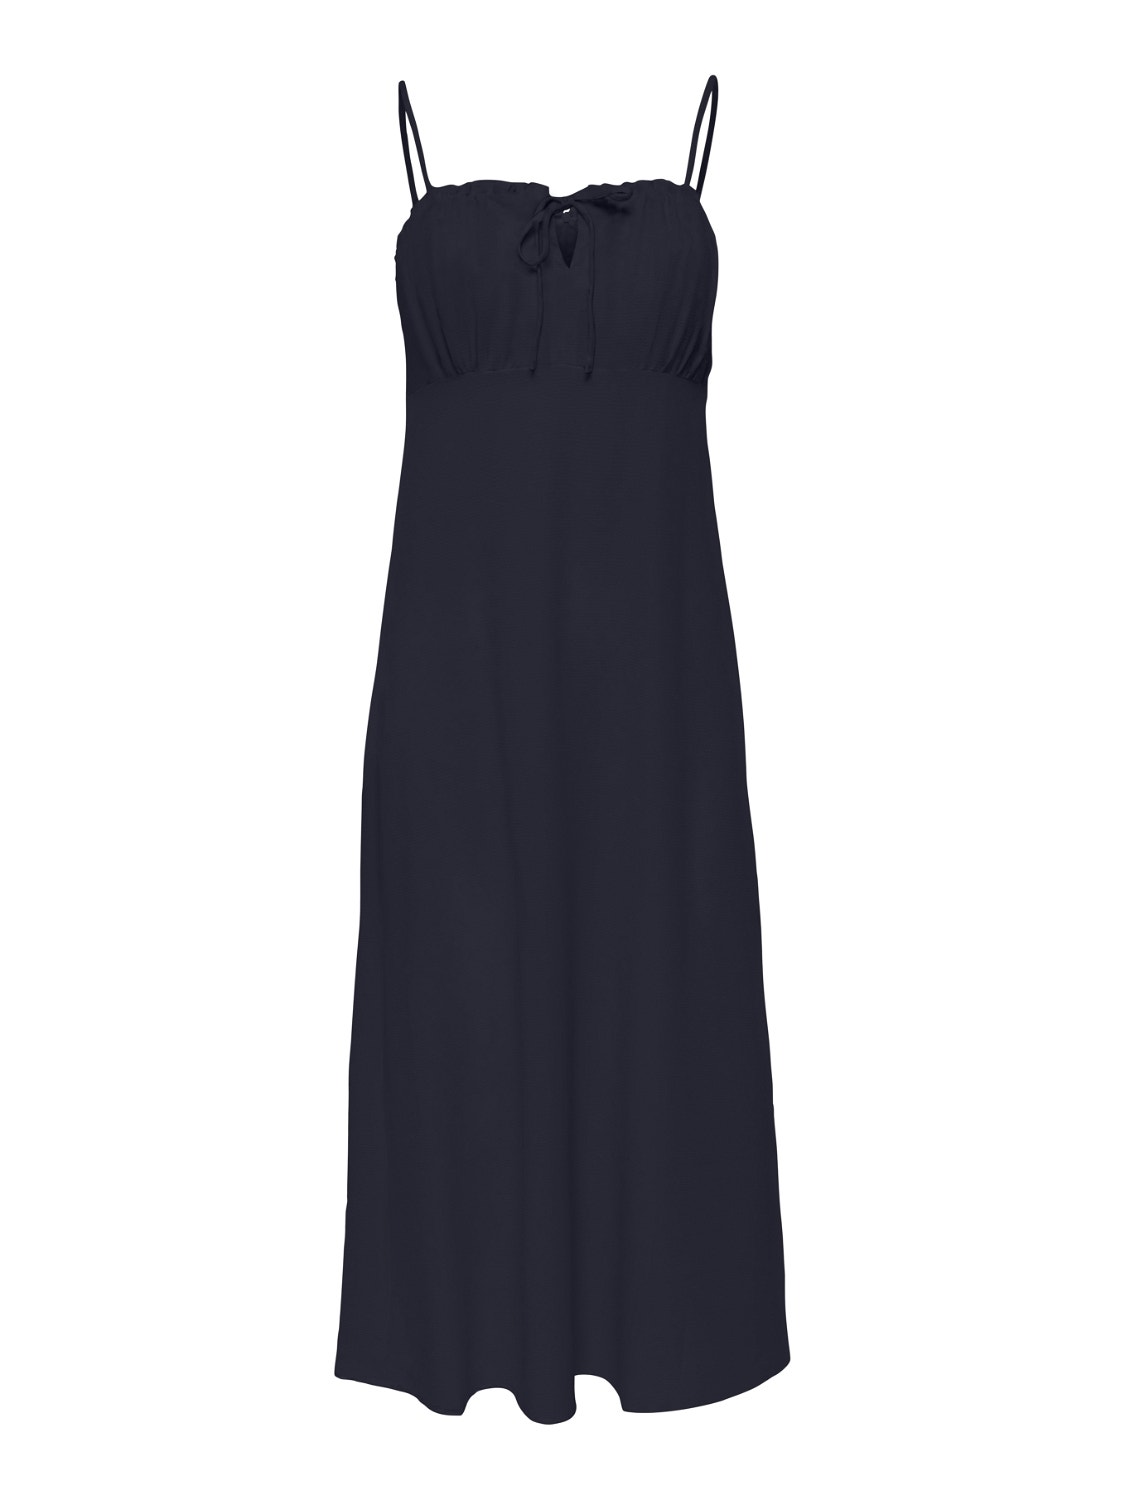 ONLY Solid colored strap Midi dress -Night Sky - 15264454